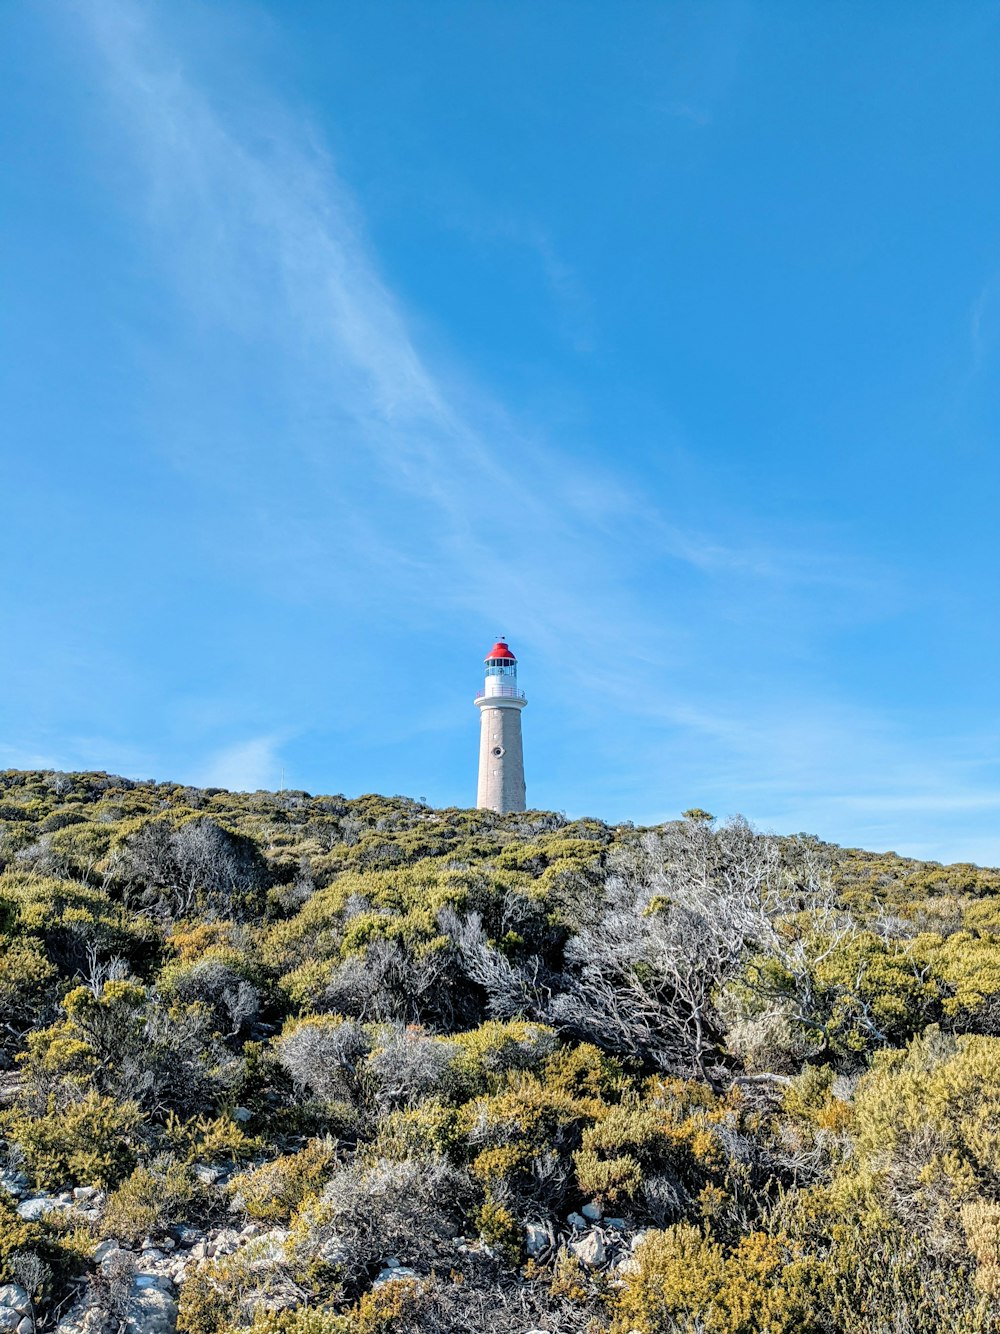 a white and red lighthouse on top of a hill